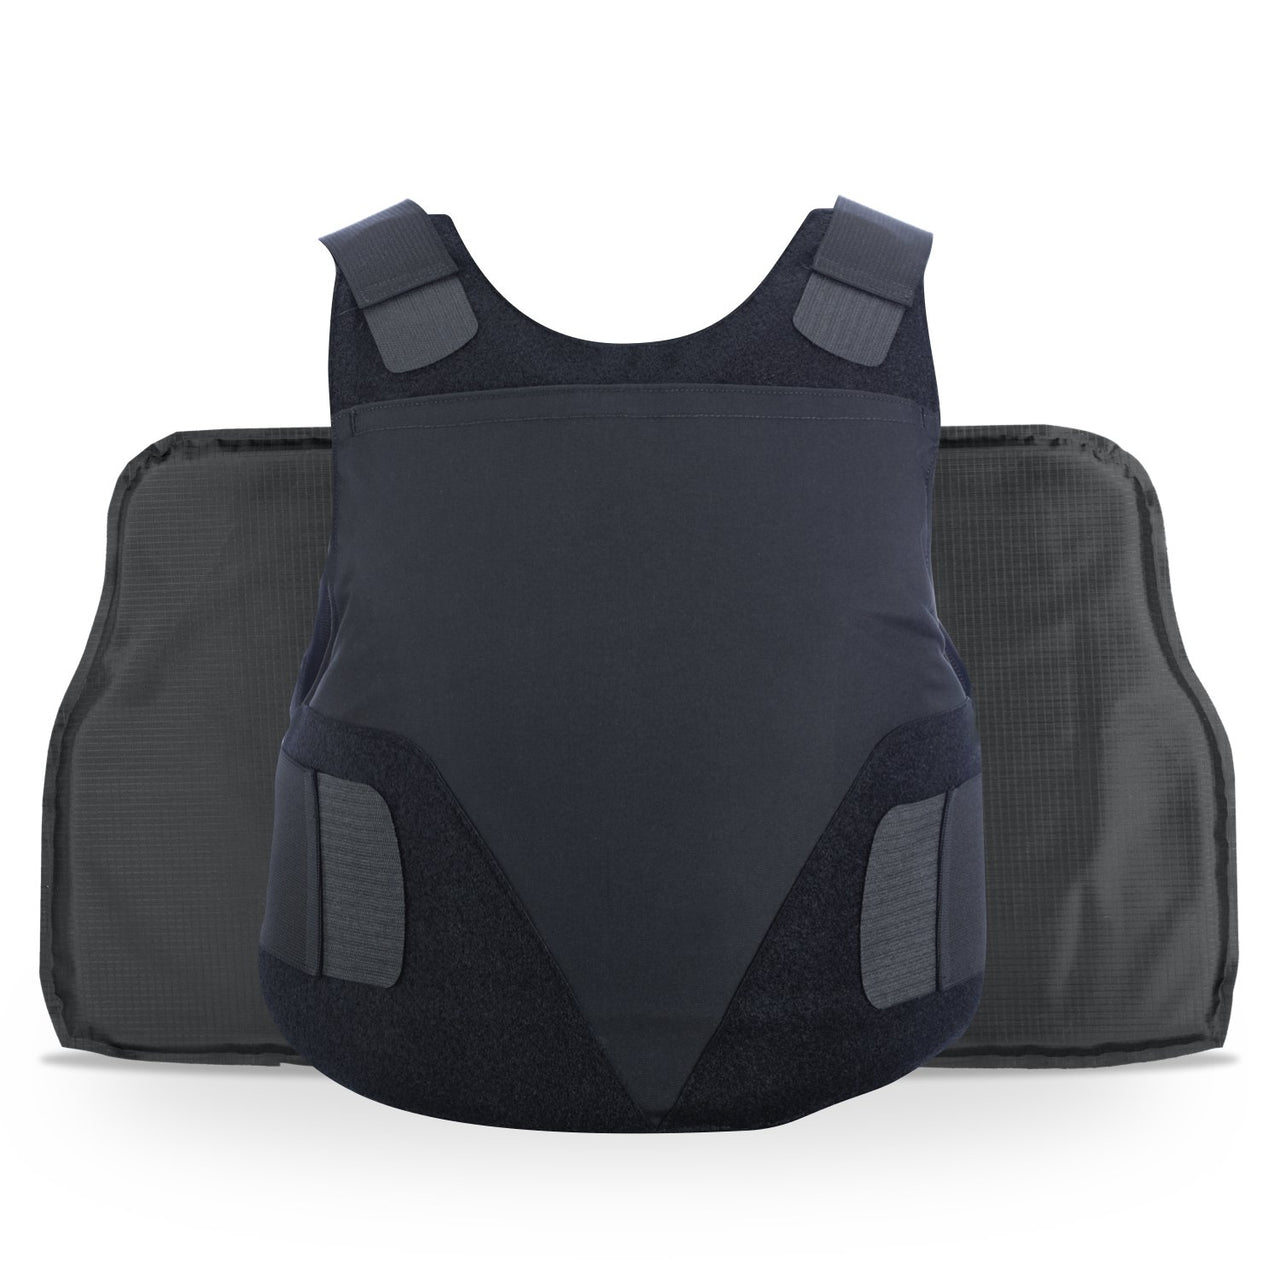 A Body Armor Direct All American Concealable Enhanced Multi-Threat Vest with two pockets on it.